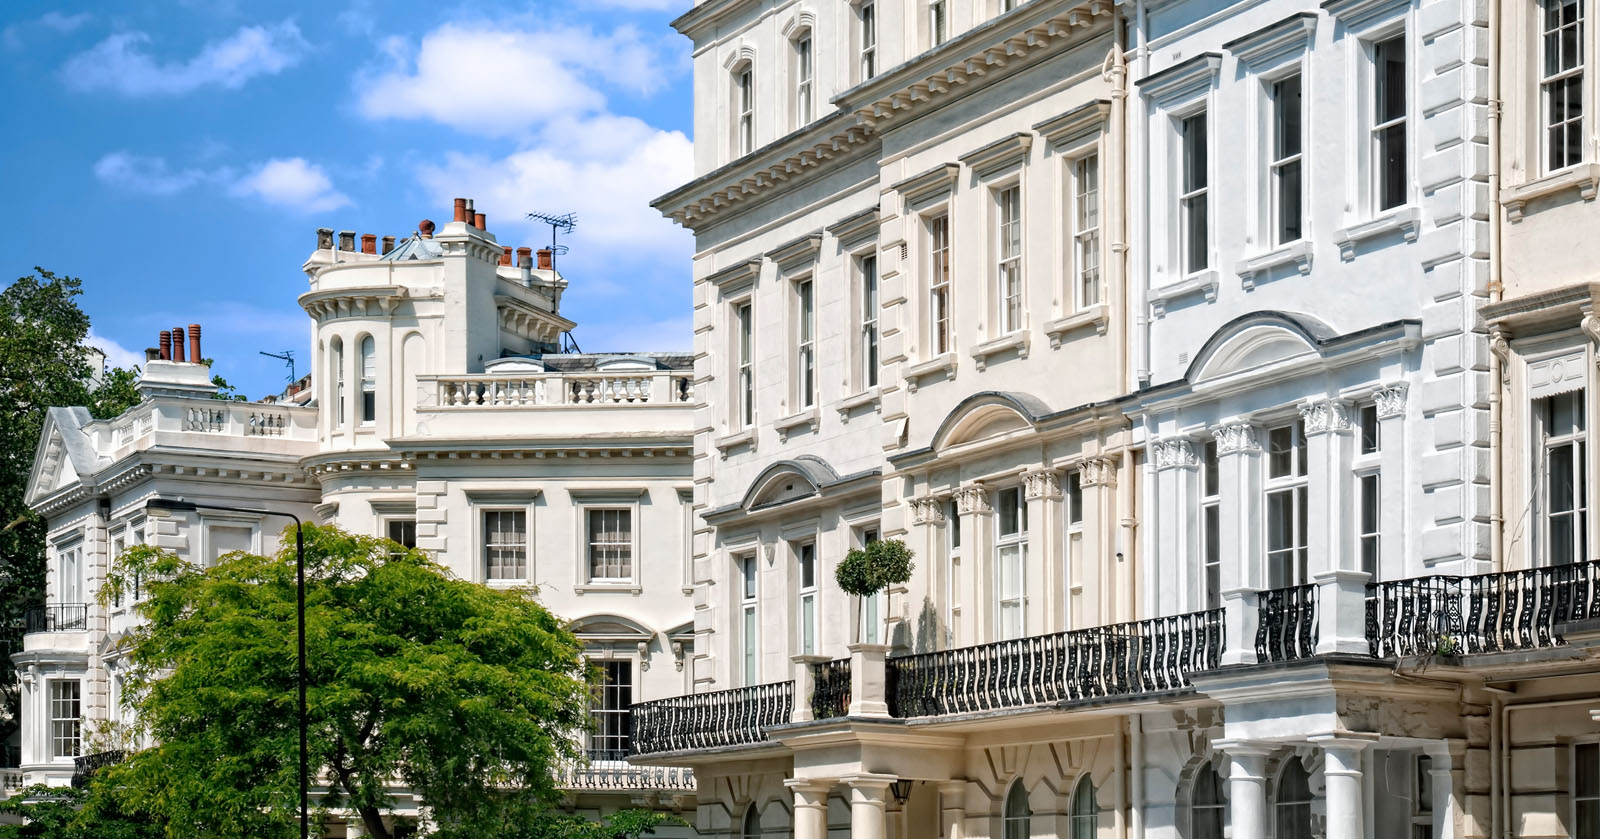 Residential landlords in London feel the pinch… - https://roomslocal.co.uk/blog/residential-landlords-in-london-feel-the-pinch #landlords #london #felt #pinch #demand